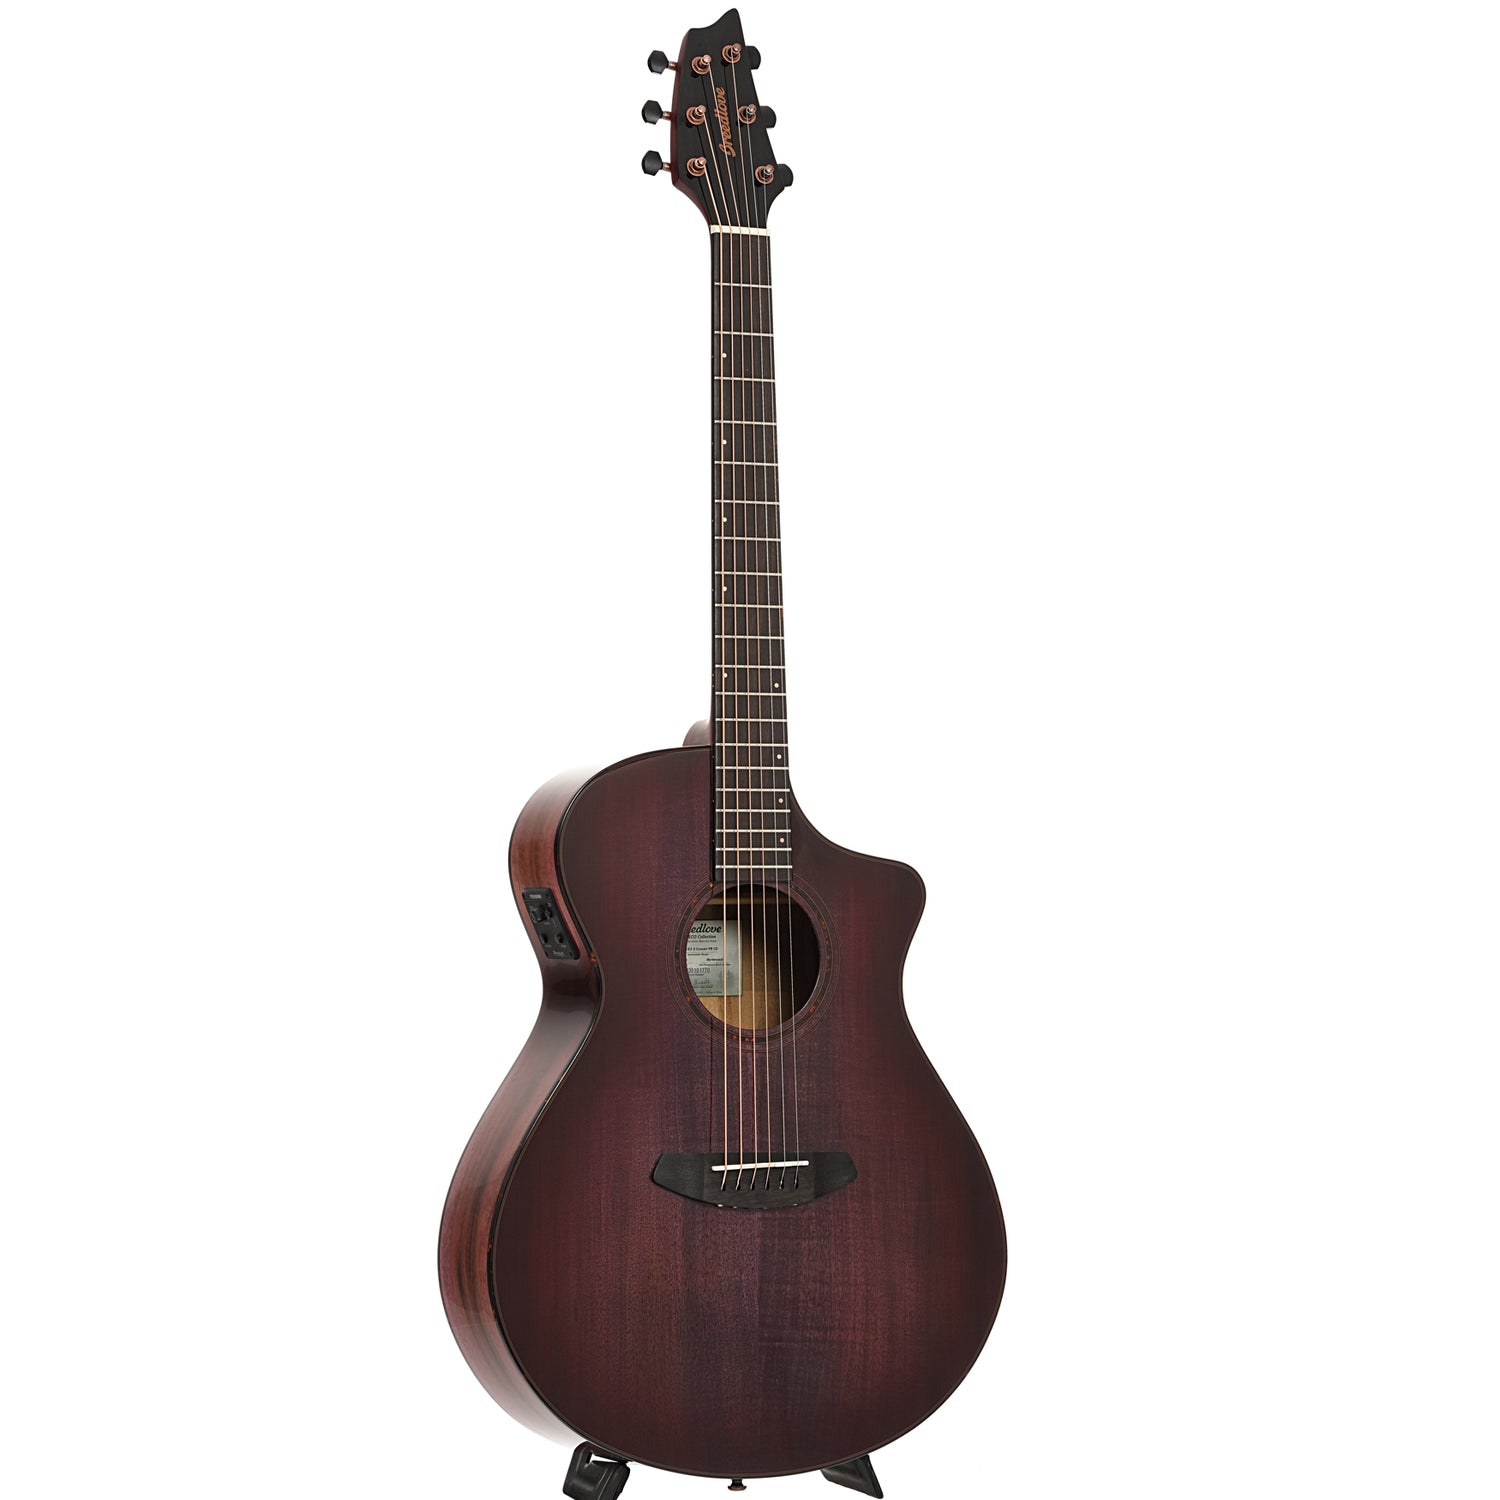 Full front and side of Breedlove Limited Edition Pursuit Exotic S Concert Pinot Burst CE Myrtlewood